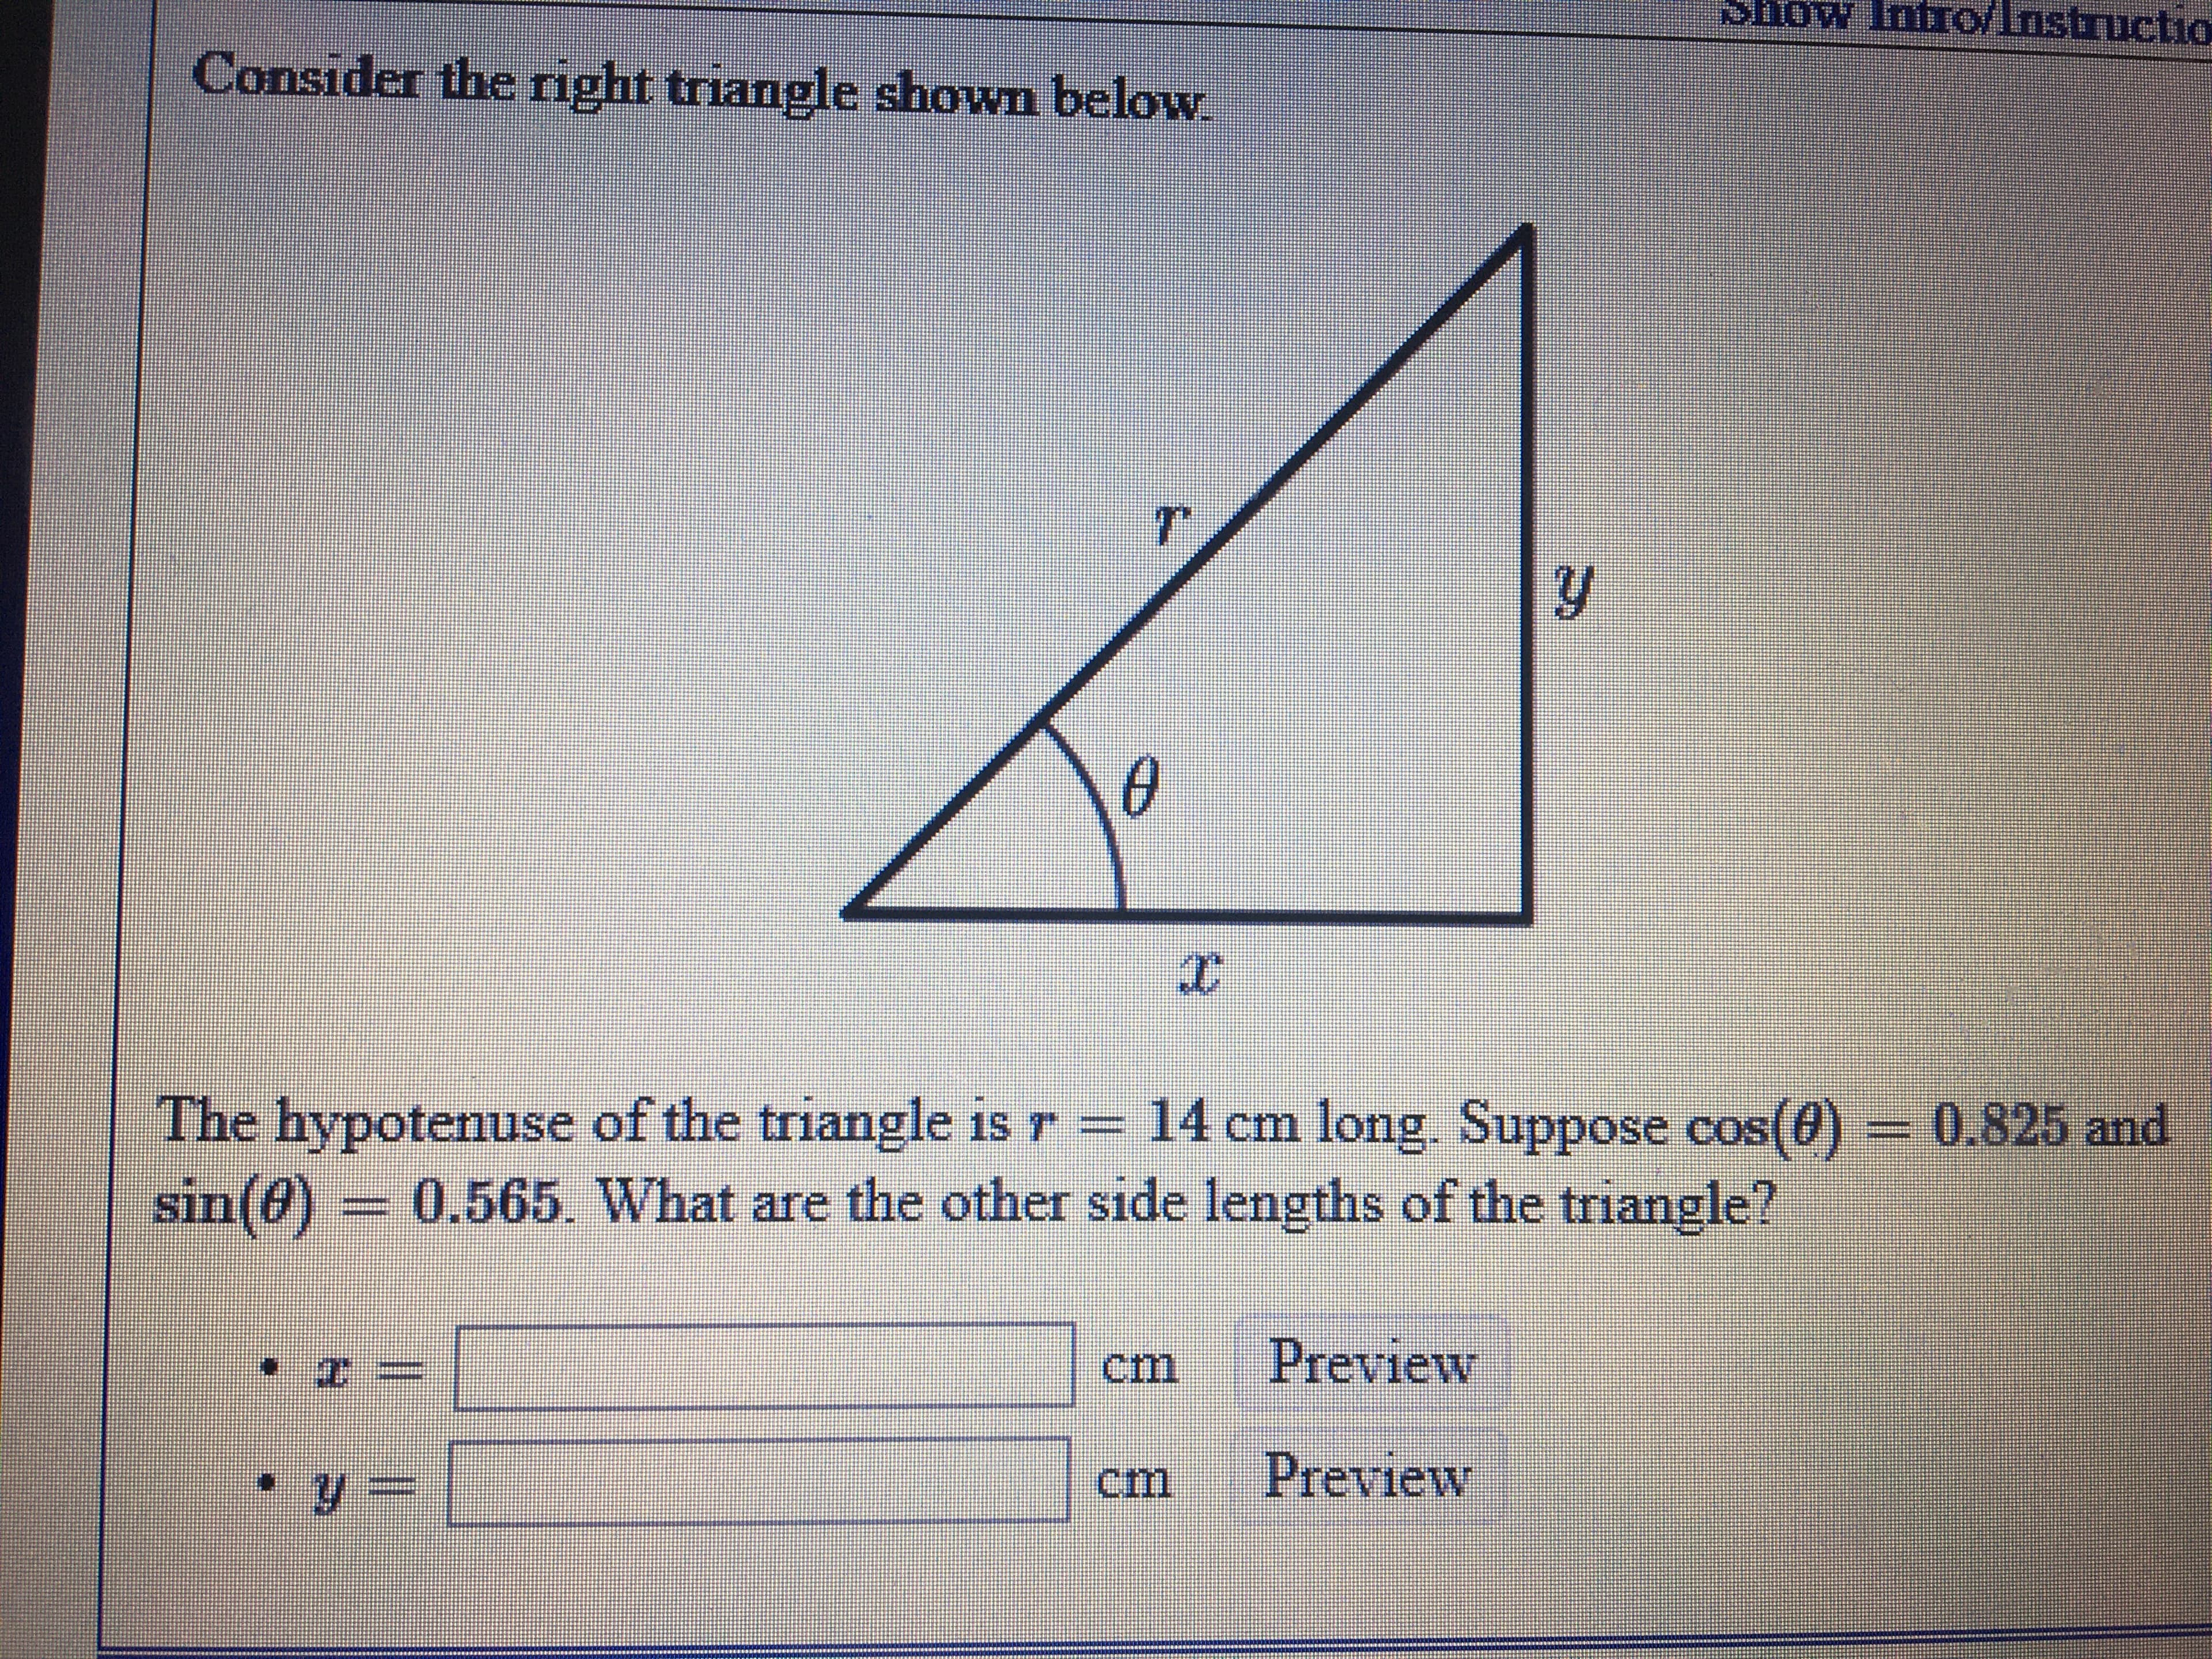 Show Intro/Instructio
Consider the right triangle shown below.
The hypotenuse of the triangle is r –
sin(@) = 0.565. What are the other side lengths of the triangle?
14 cm long. Suppose cos(0) -
0.825and
Preview
Preview
